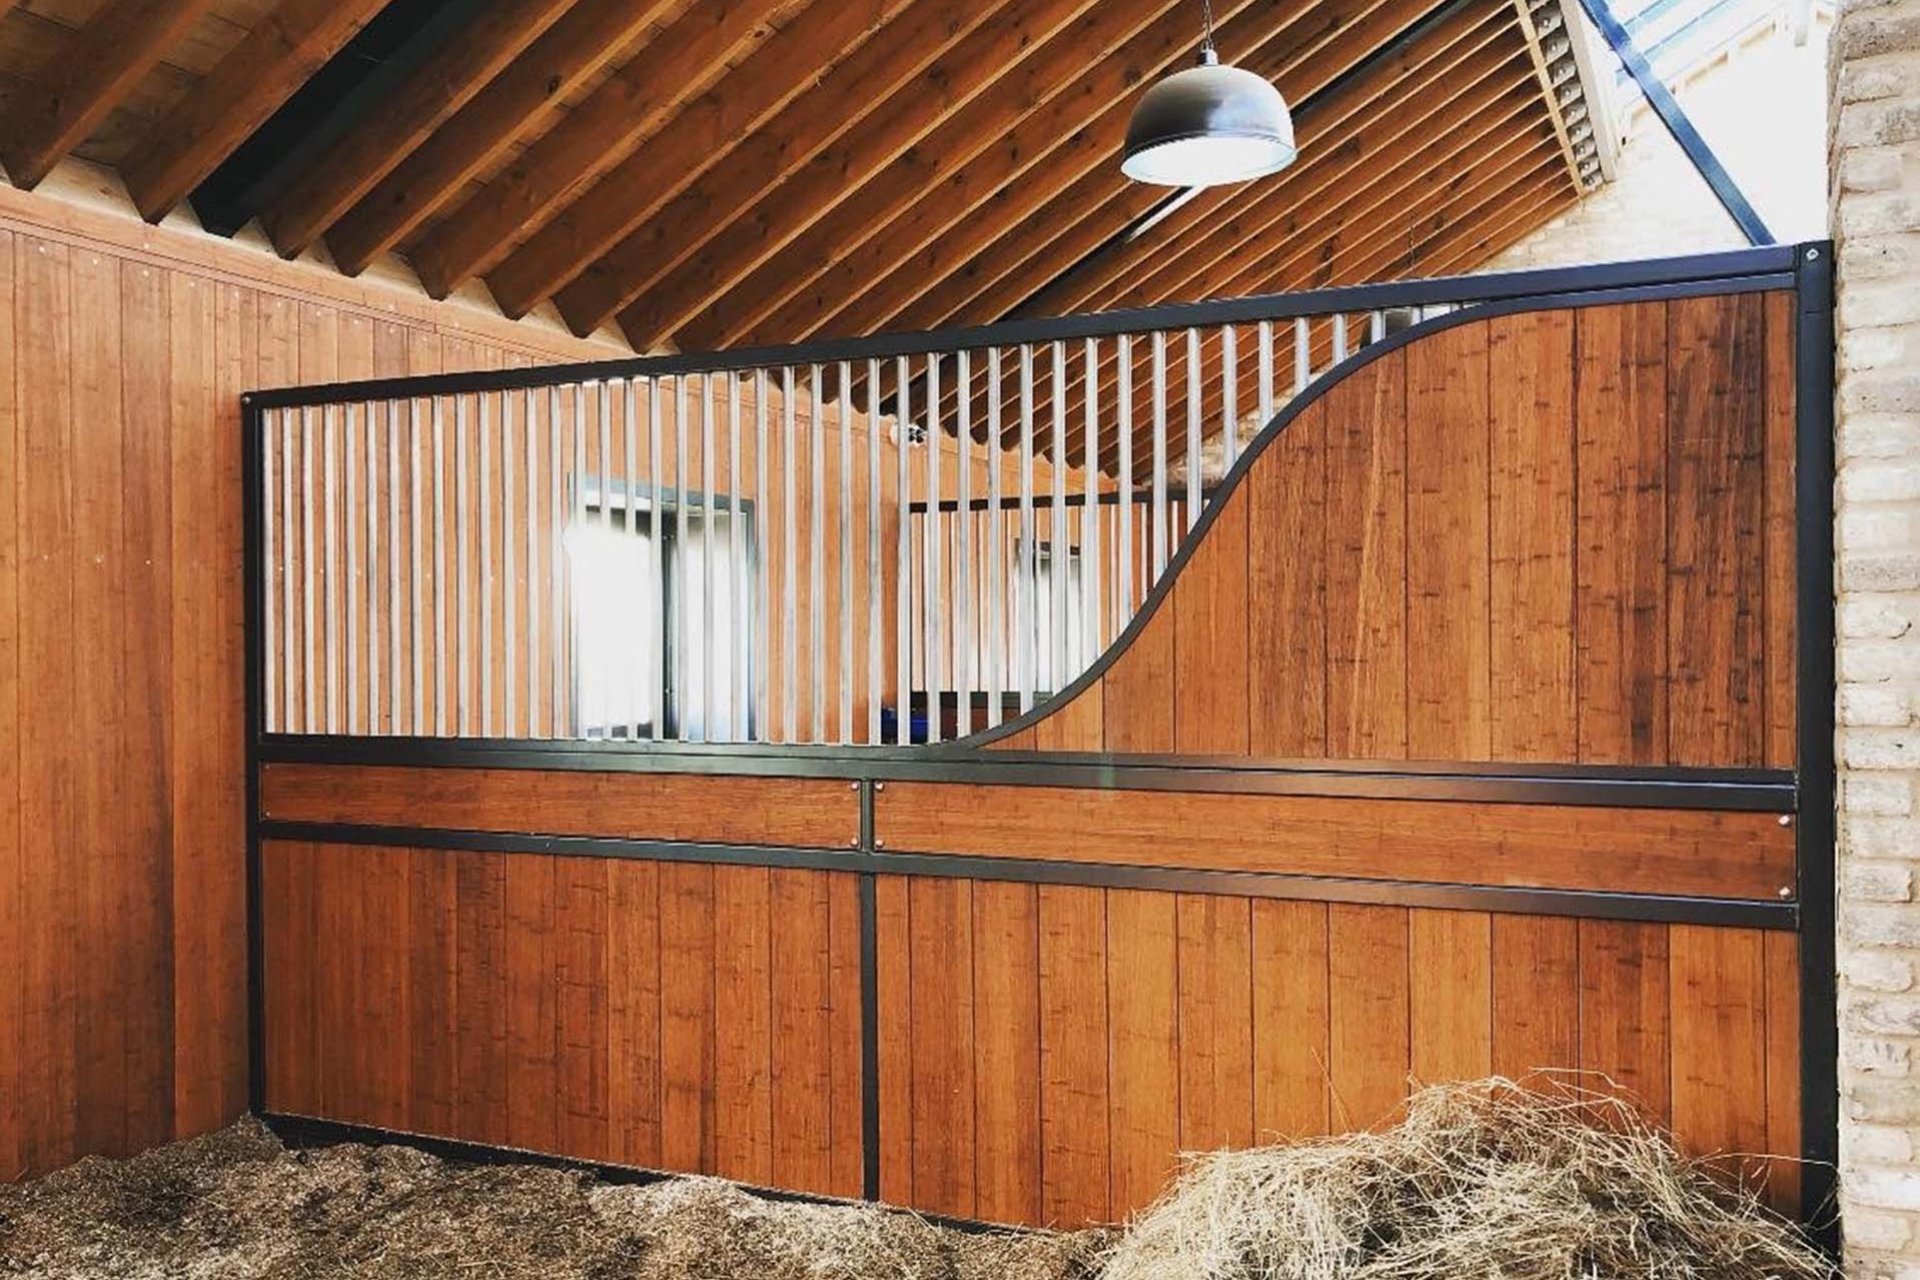 Image horse stall stable partitions (M000091113)